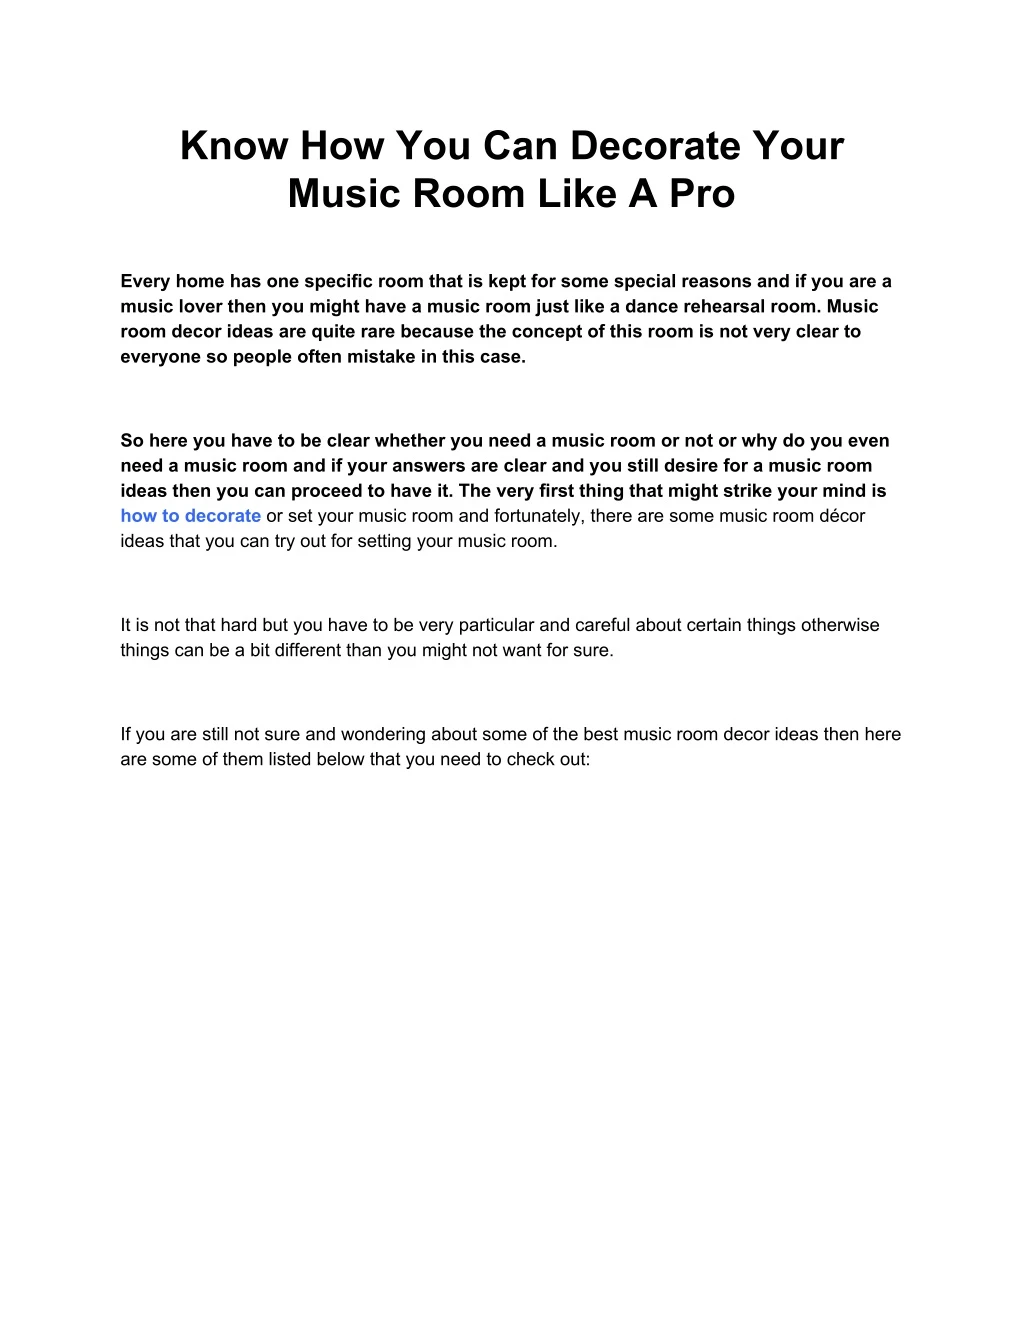 know how you can decorate your music room like